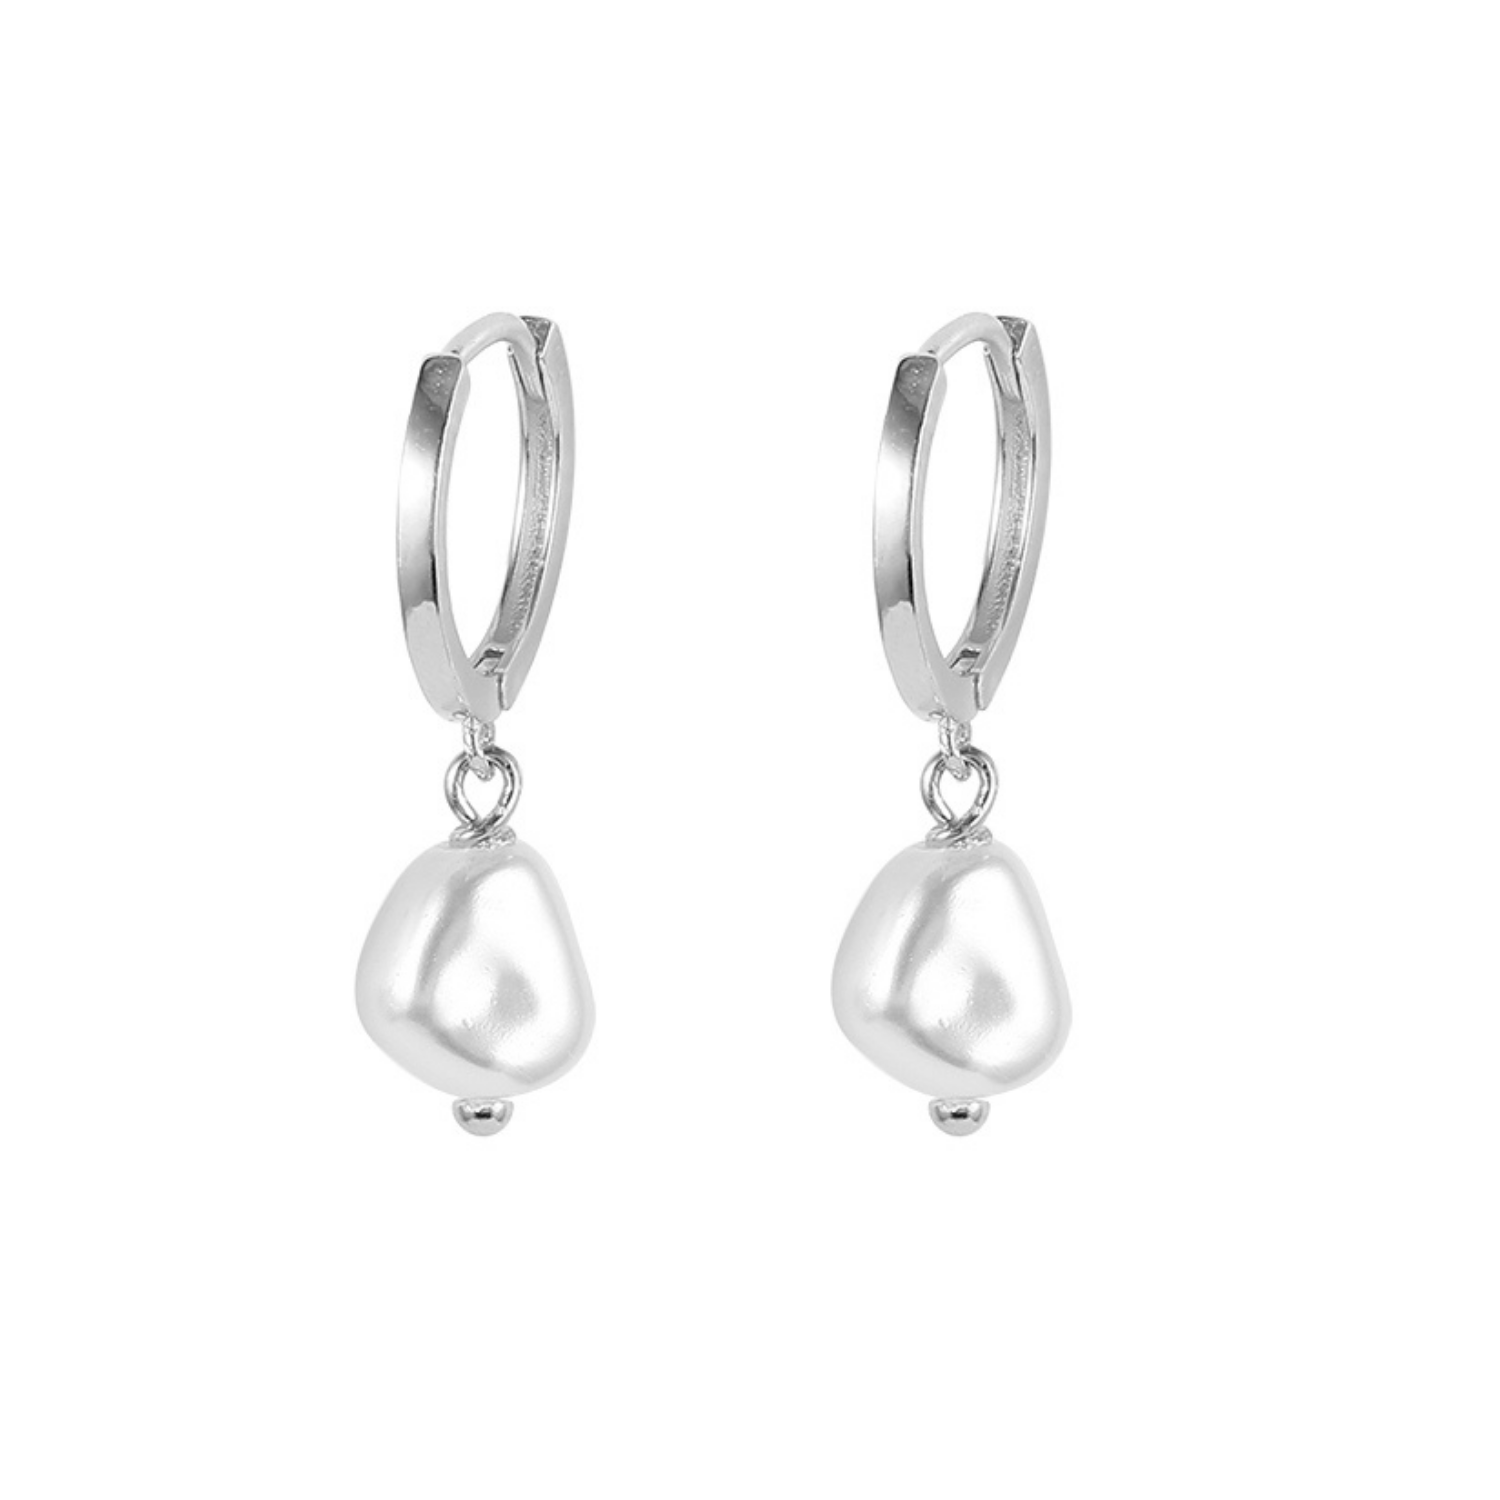 Sterling silver Baroque hoop earrings displayed on a white background